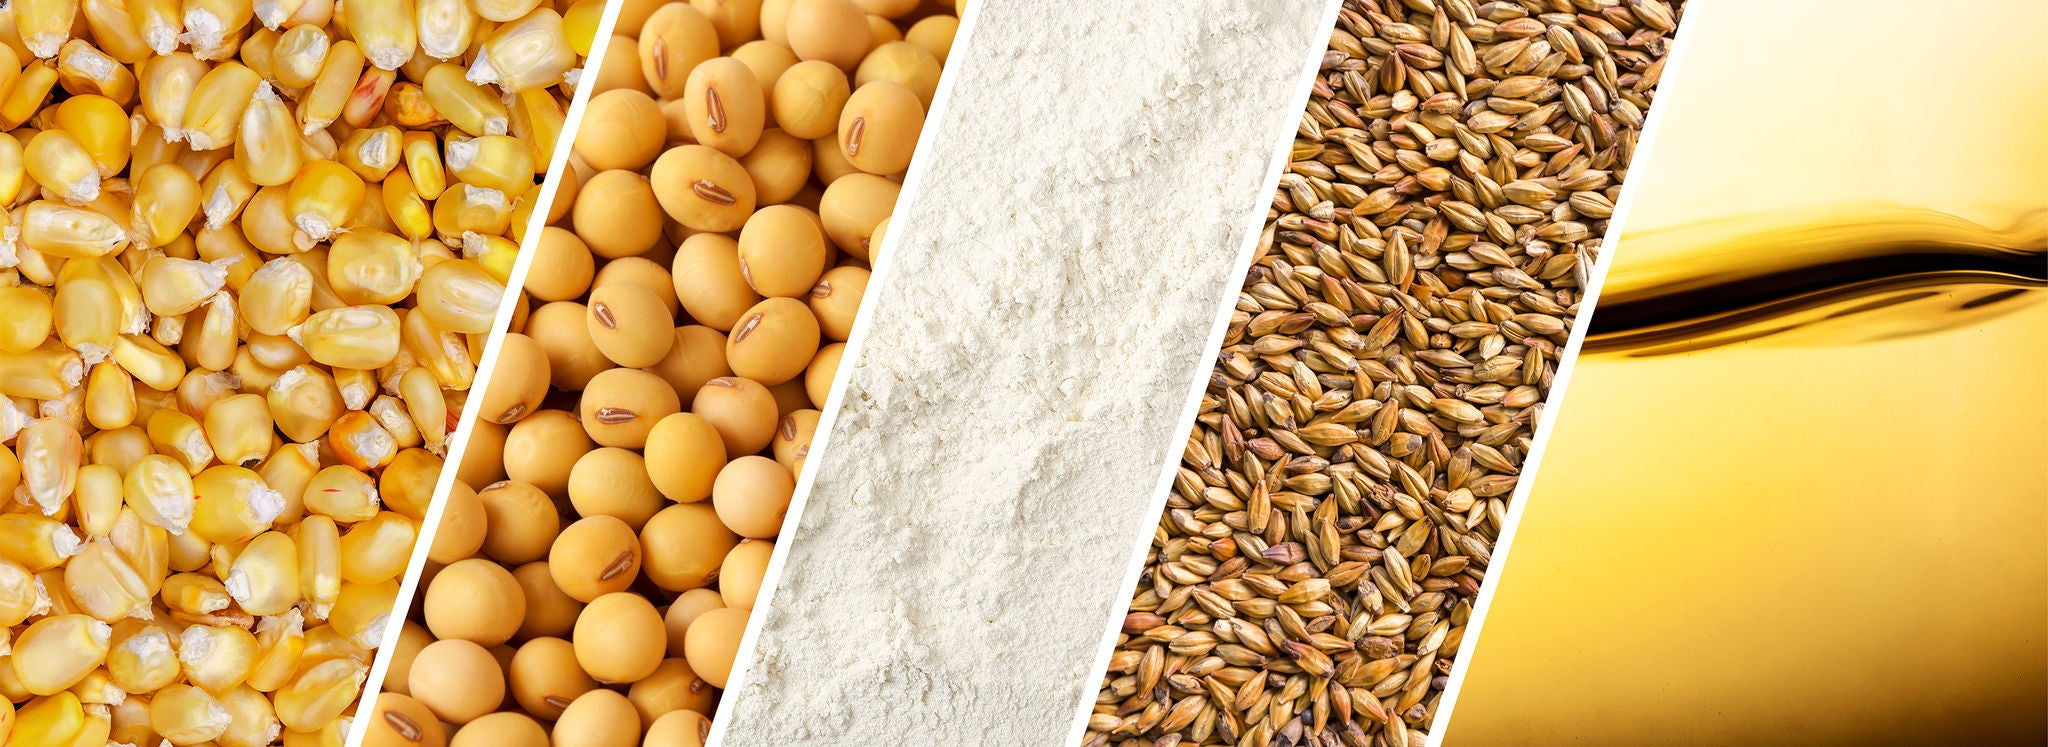 Close up of shippable agricultural products featuring corn, wheat, soybeans, grains, and food oils